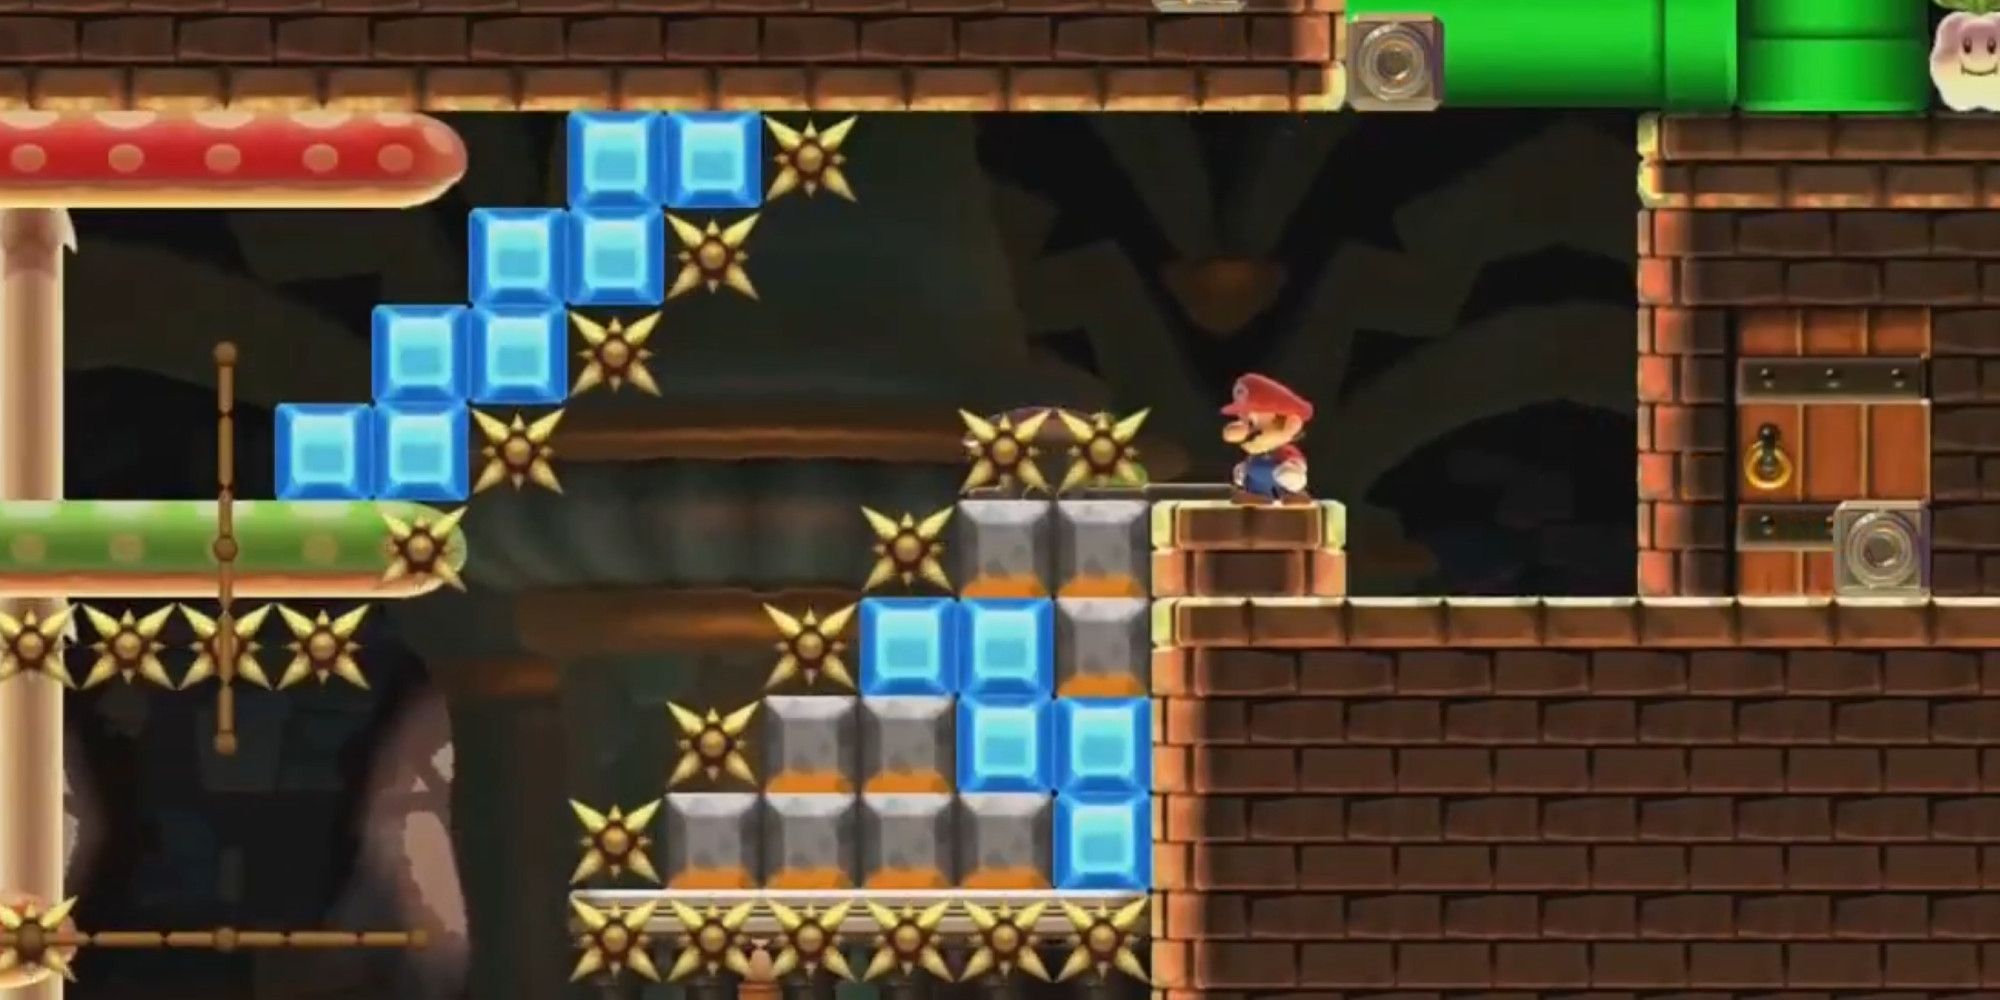 Mario standing at the end of a brutal level filled with spikes, platforms, and bombs